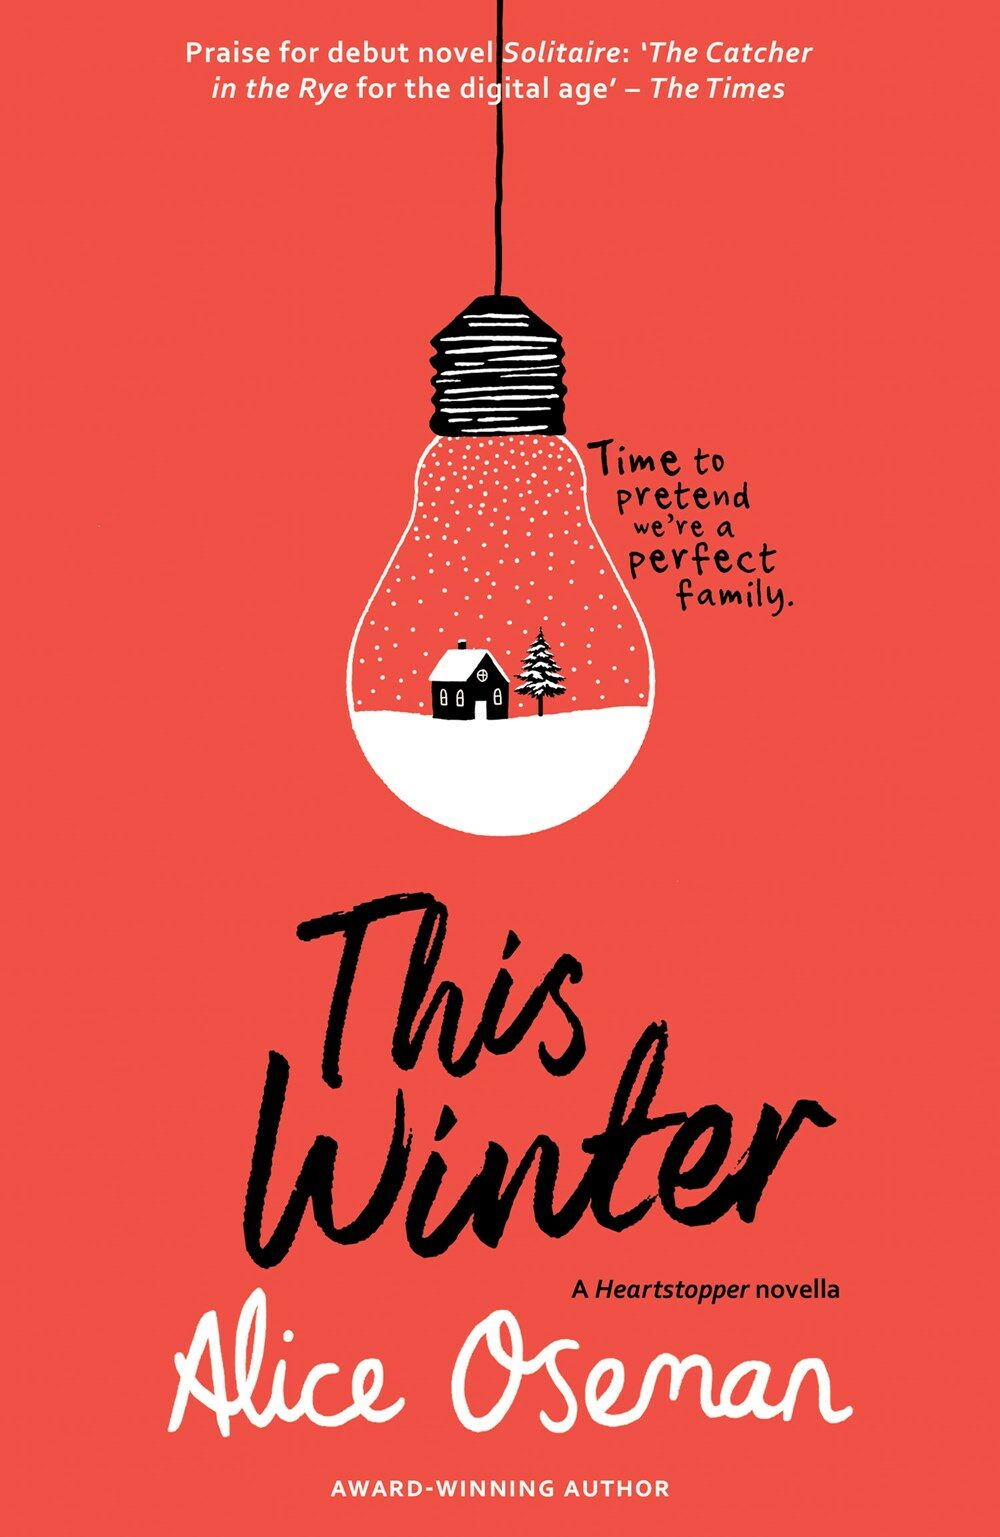 This Winter : Tiktok Made Me Buy it! from the Ya Prize Winning Author and Creator of Netflix Series Heartstopper (Paperback)